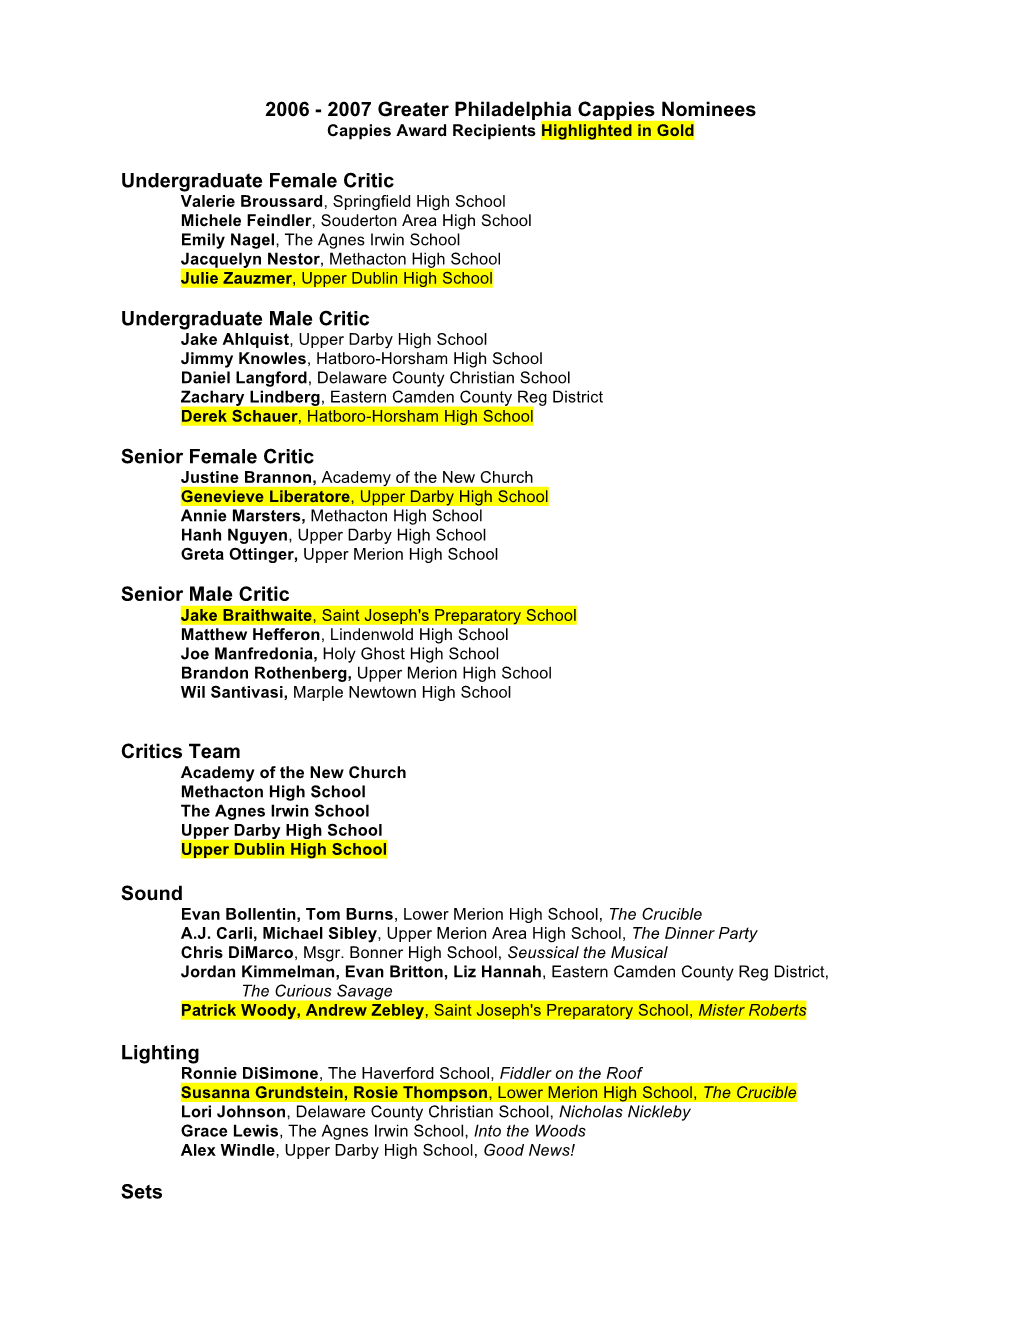 2006 - 2007 Greater Philadelphia Cappies Nominees Cappies Award Recipients Highlighted in Gold